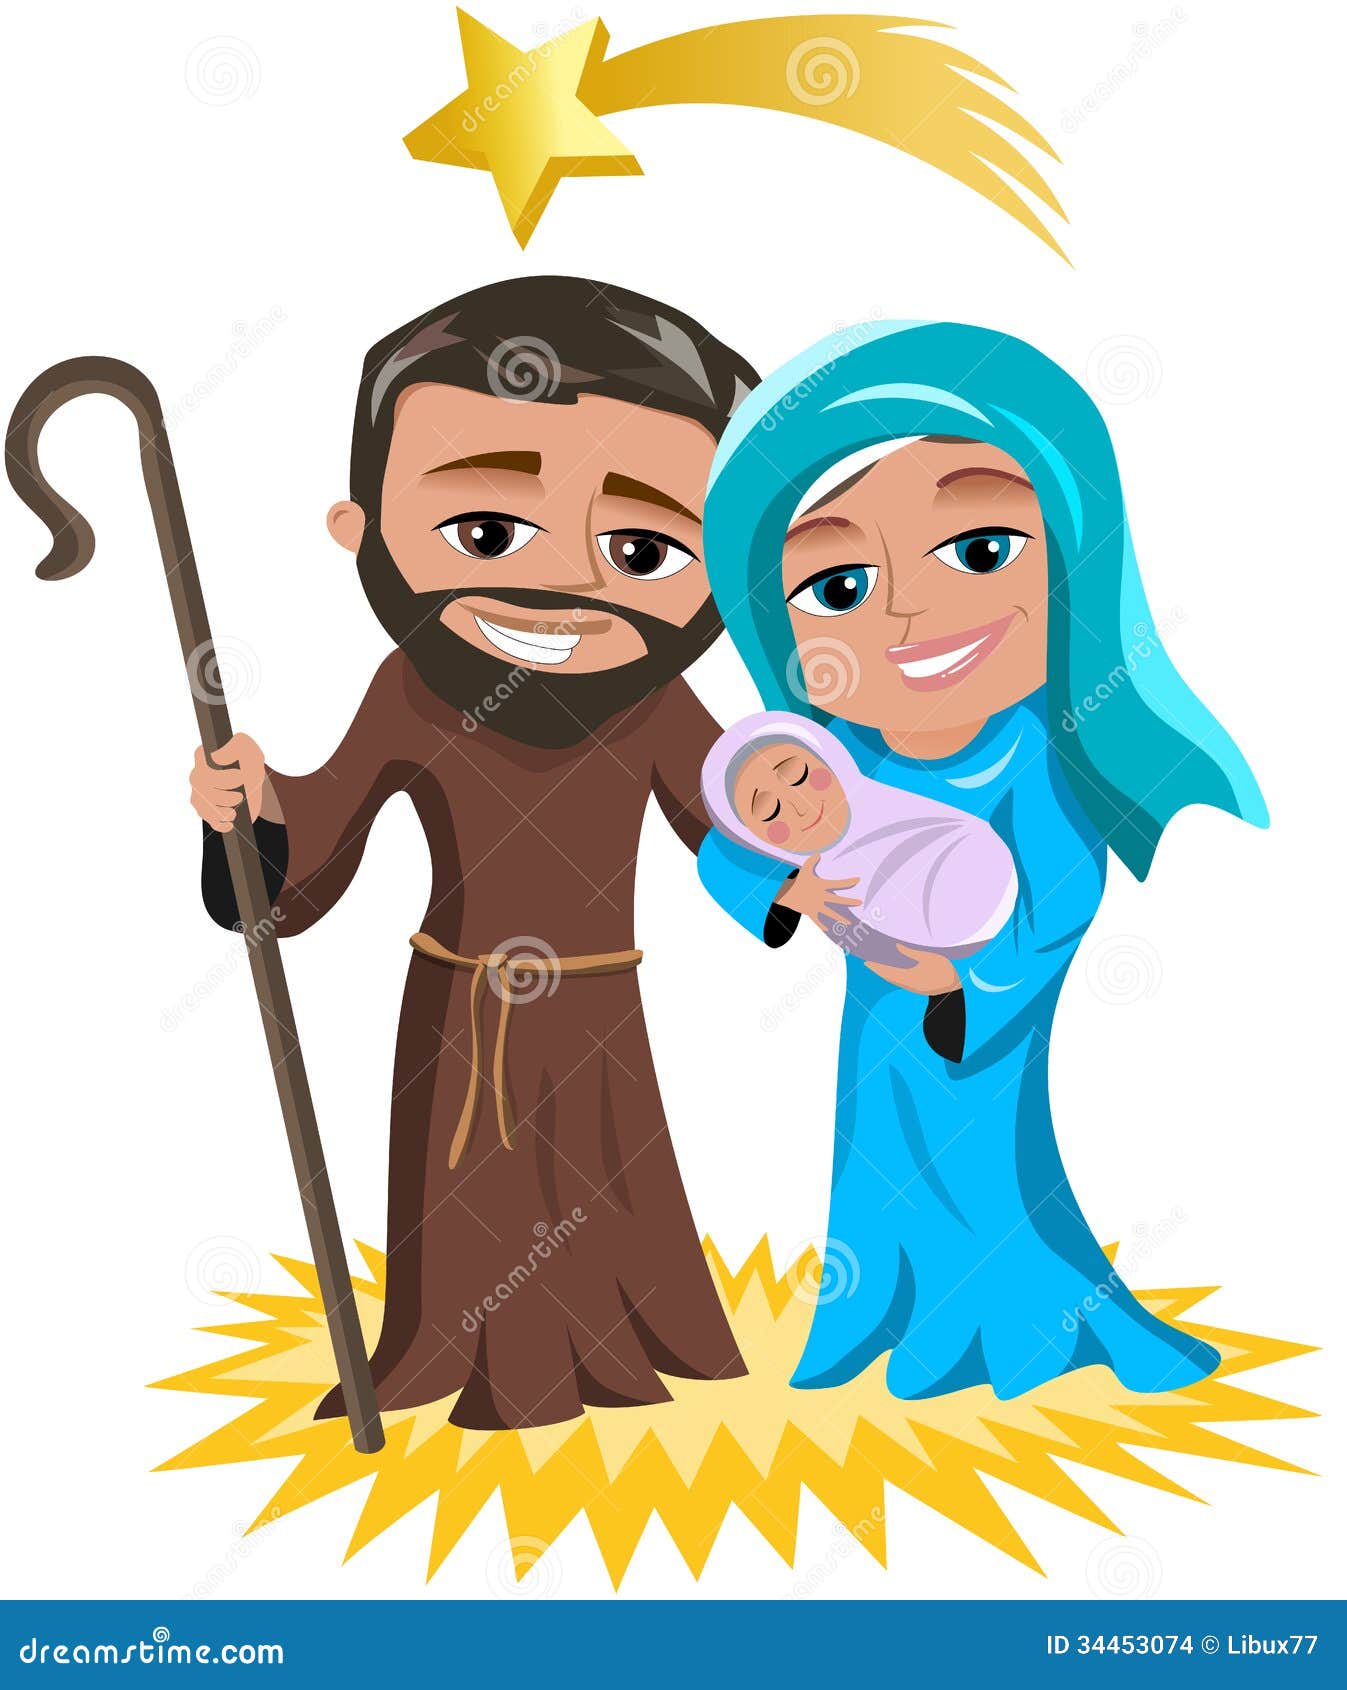 clipart of jesus holding baby - photo #12